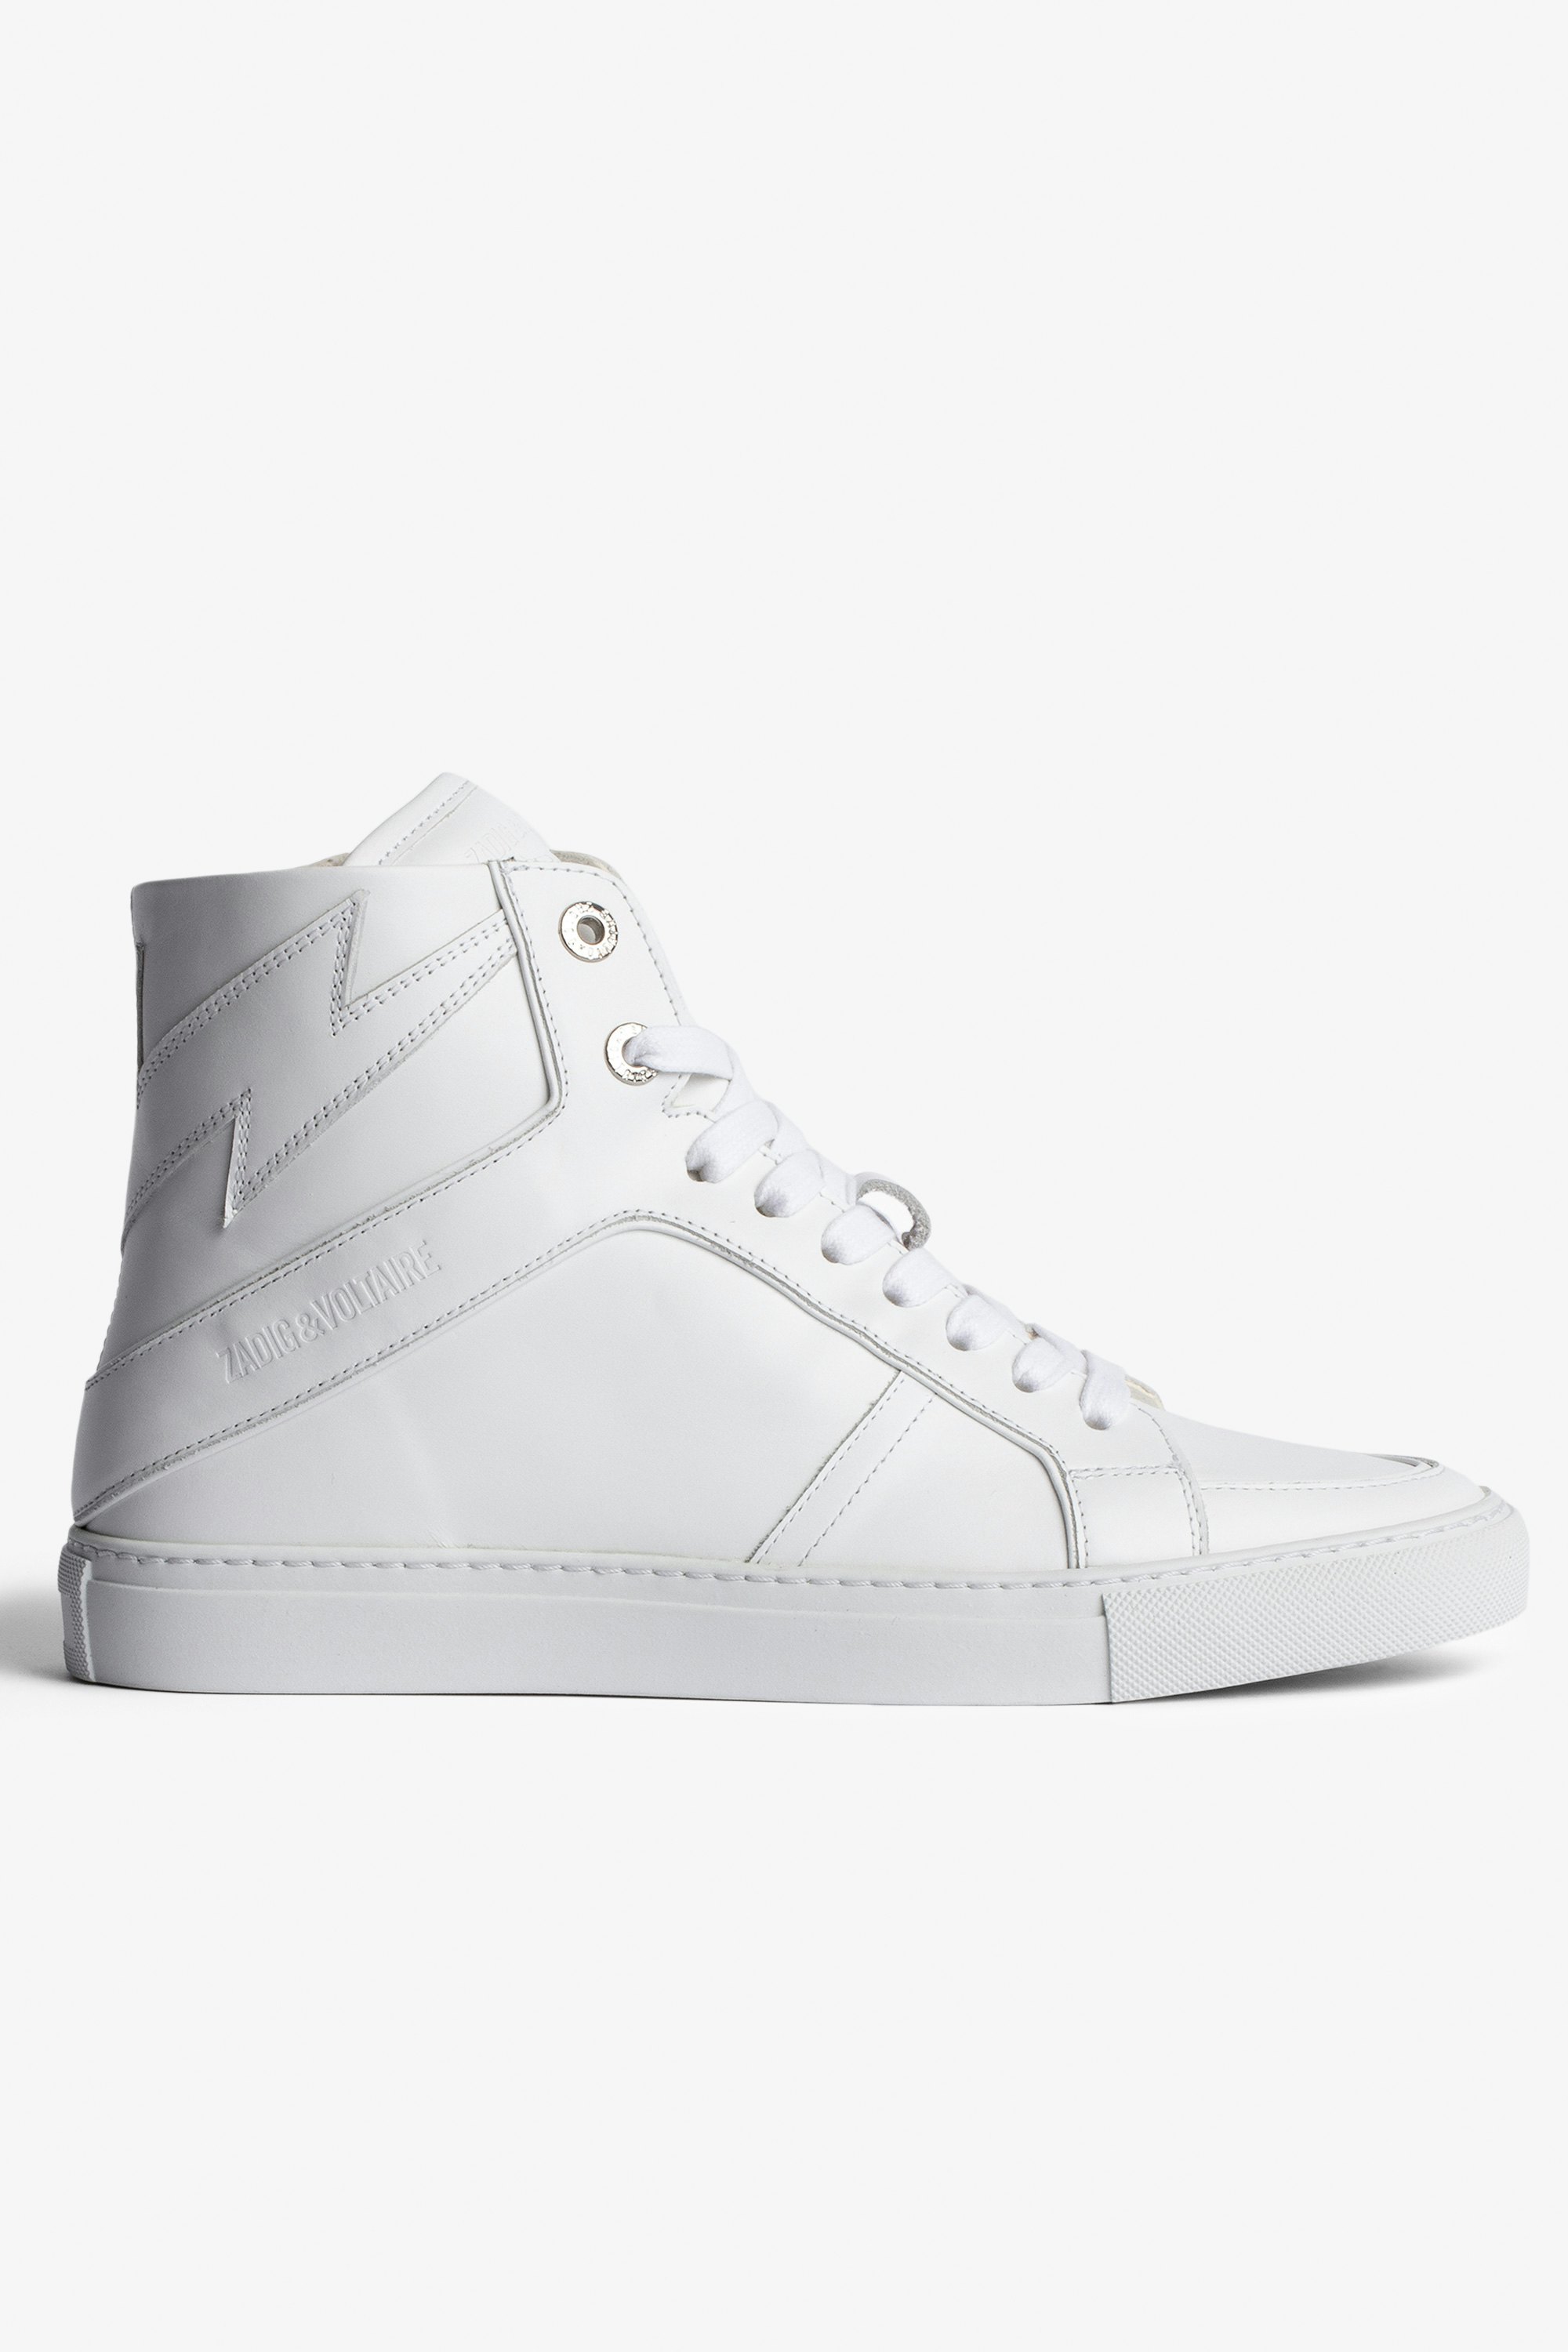 ZV1747 High Flash Sneakers Women’s white leather high-top sneakers.